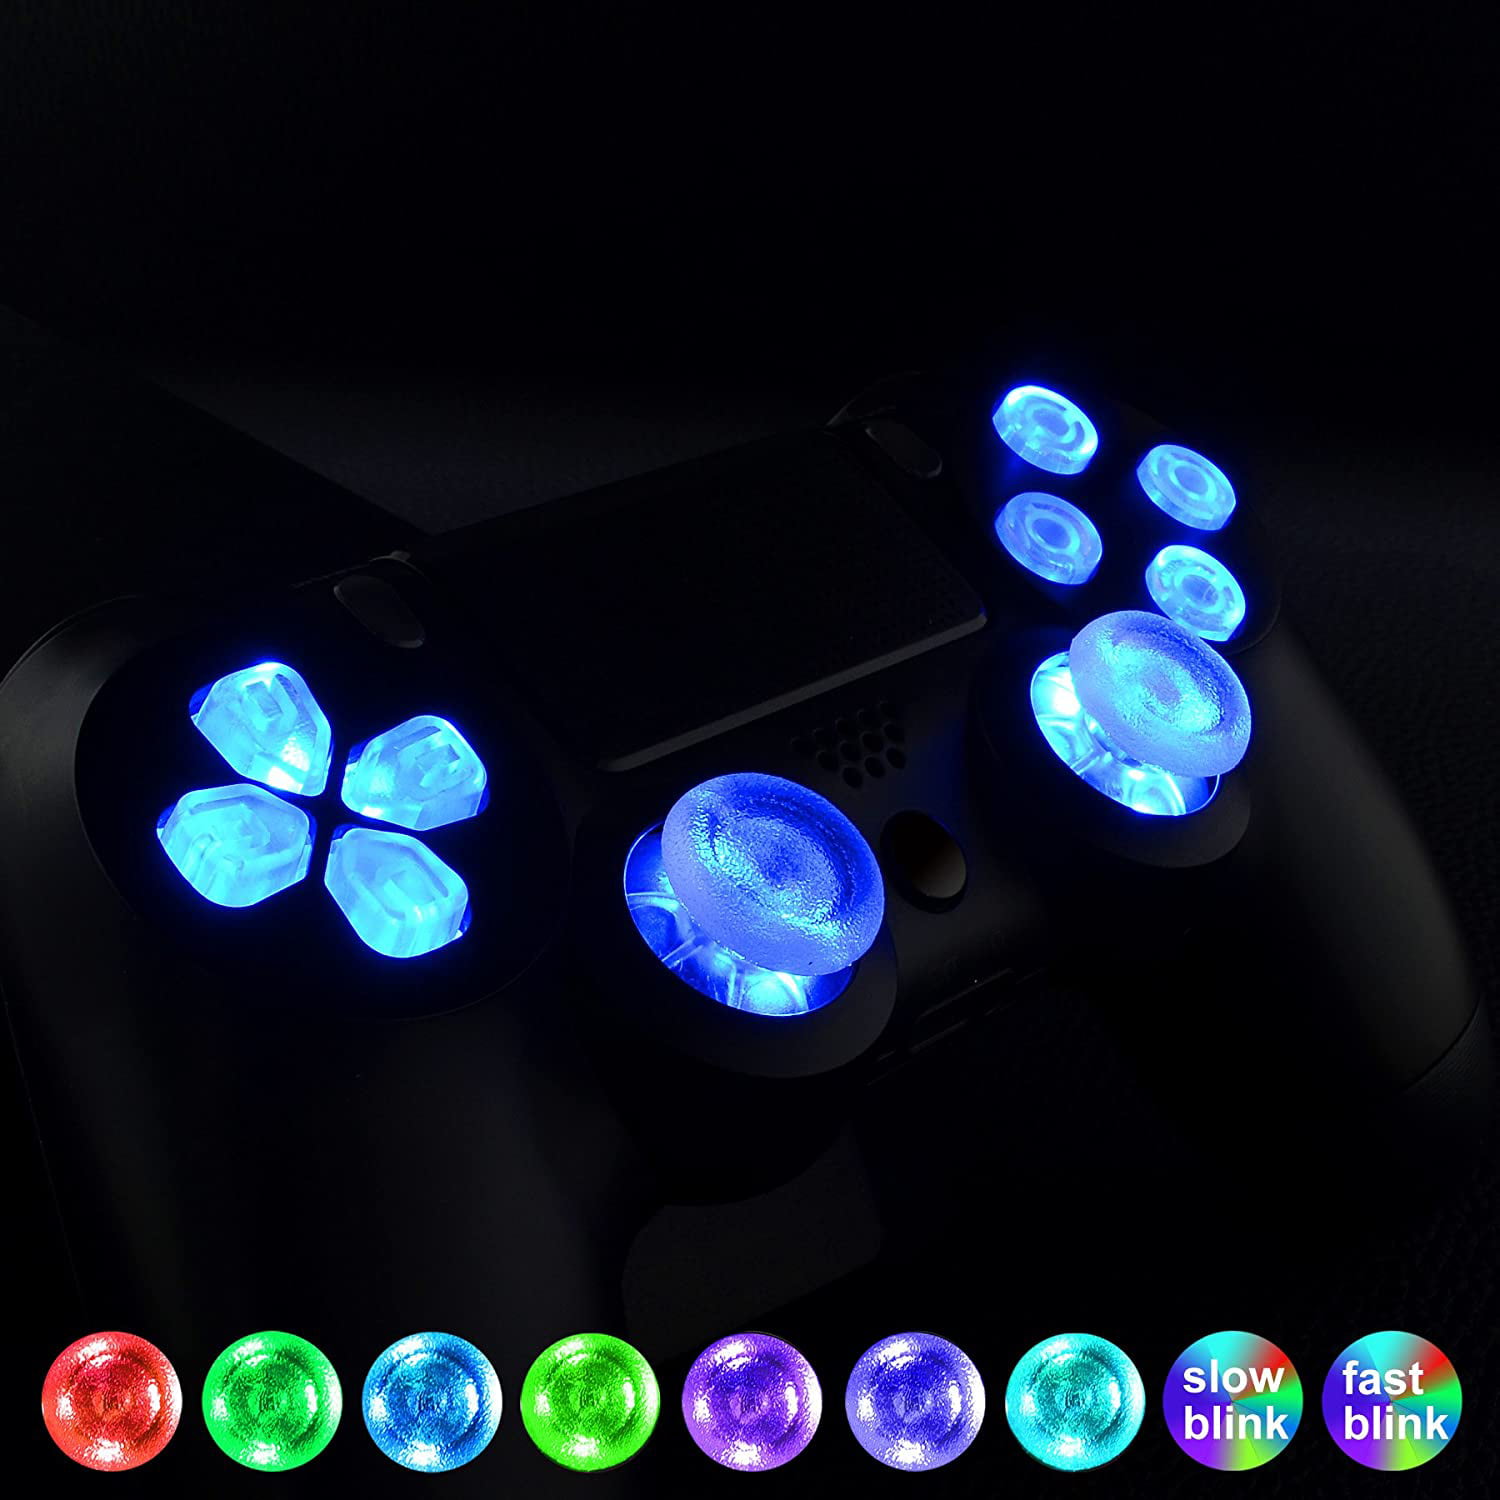 Multi Colors Luminated D Pad Thumbsticks Face Buttons Dtf Led Kit For Ps4 Controller 7 Colors 9 Modes Touch Control Walmart Com